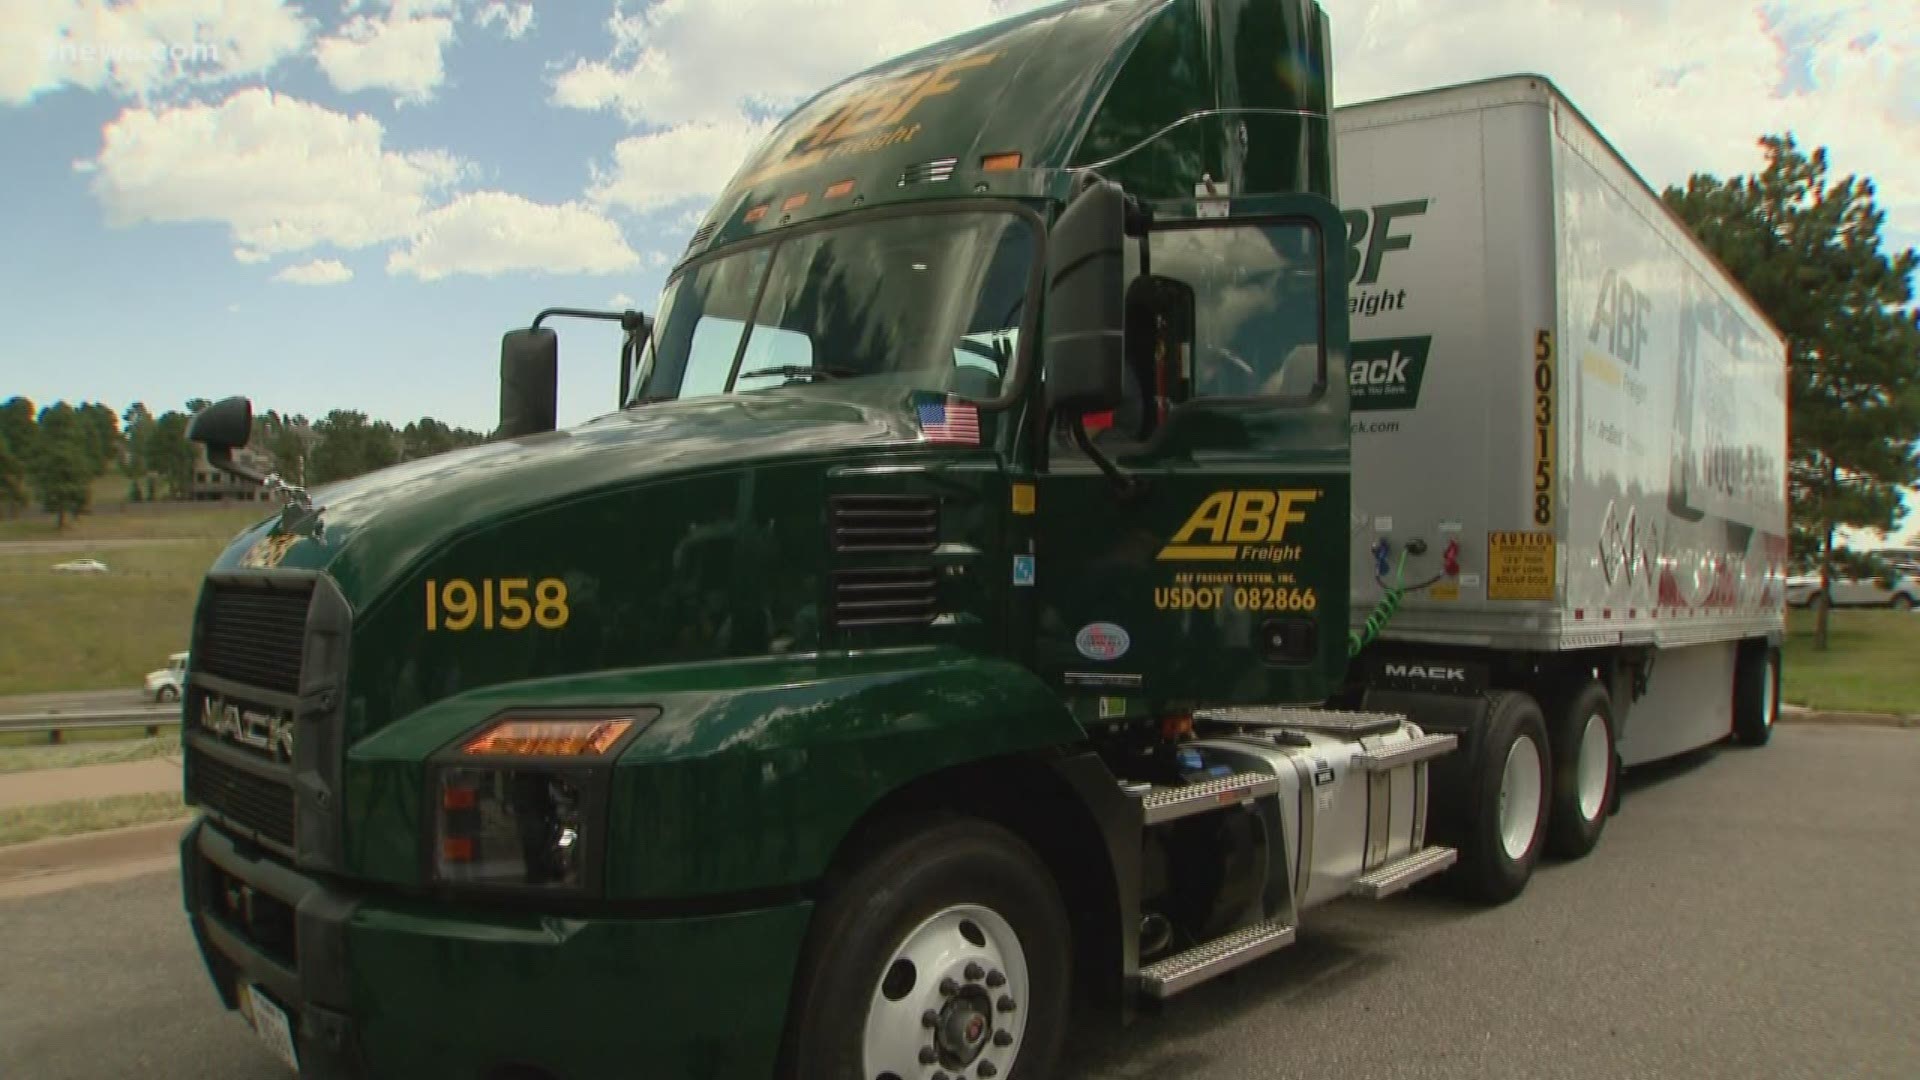 CDOT hopes to educate drivers for trucking companies across the country about the challenges of driving in the mountains.